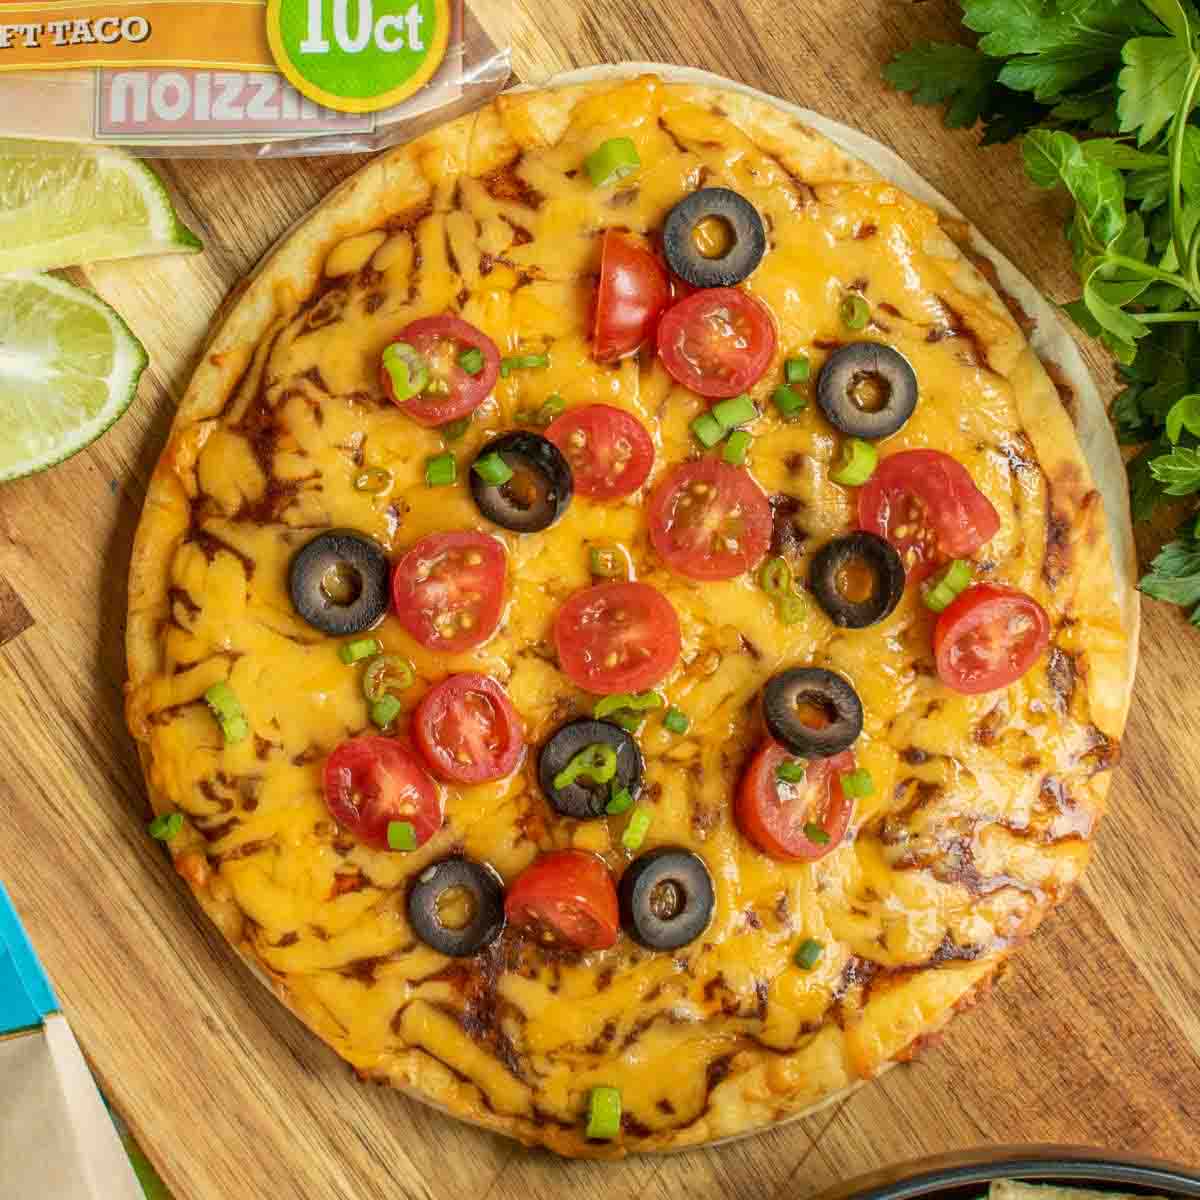 Taco Bell Mexican Pizza layered with refried beans, ground beef and cheese